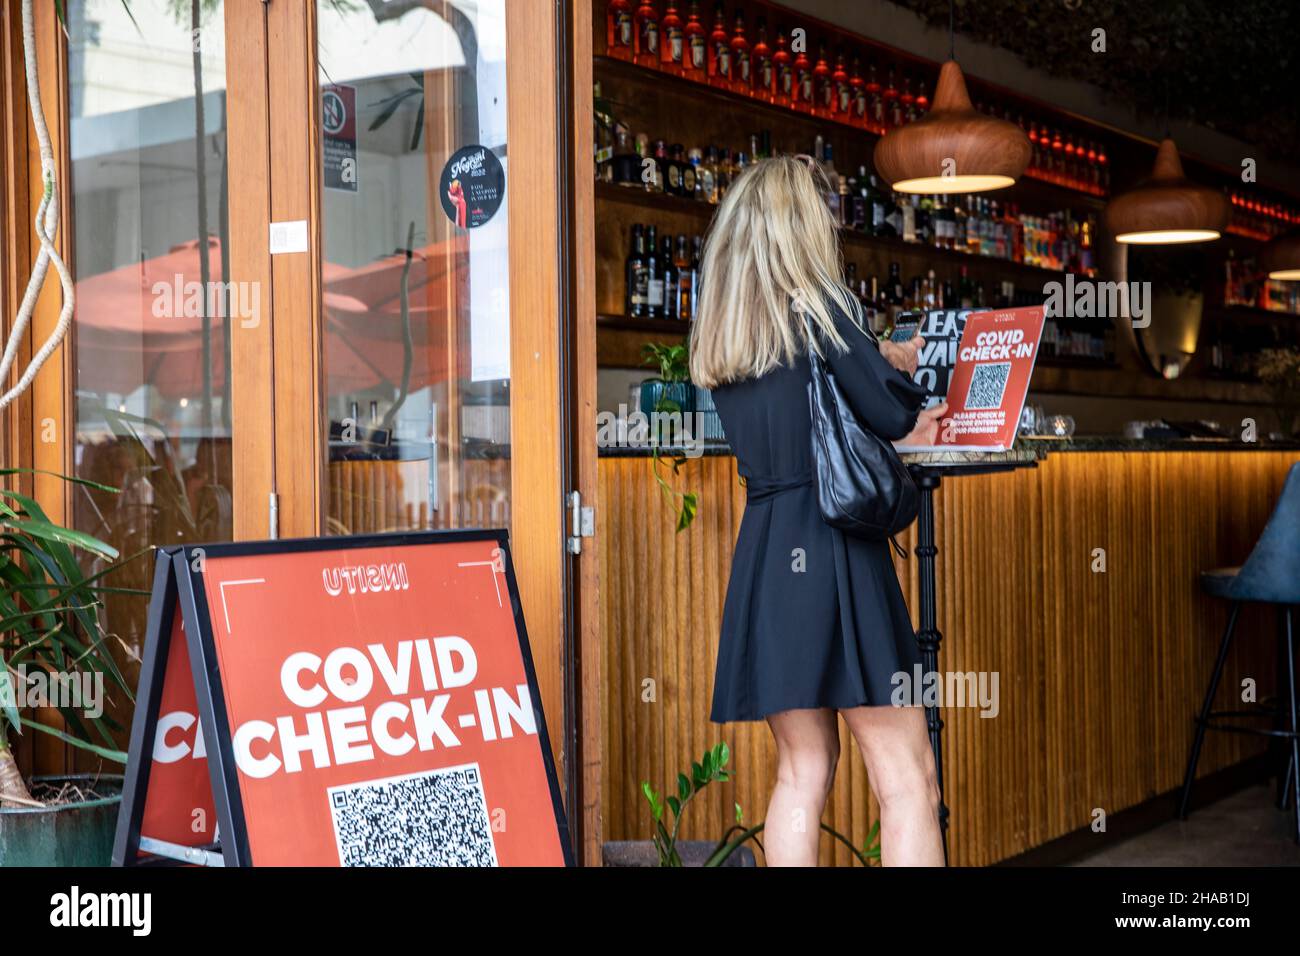 Covid 19 worldwide pandemic, in Sydney woman uses phone to scan app to check in at a restaurant bar, for contact tracing,Sydney,Australia Stock Photo